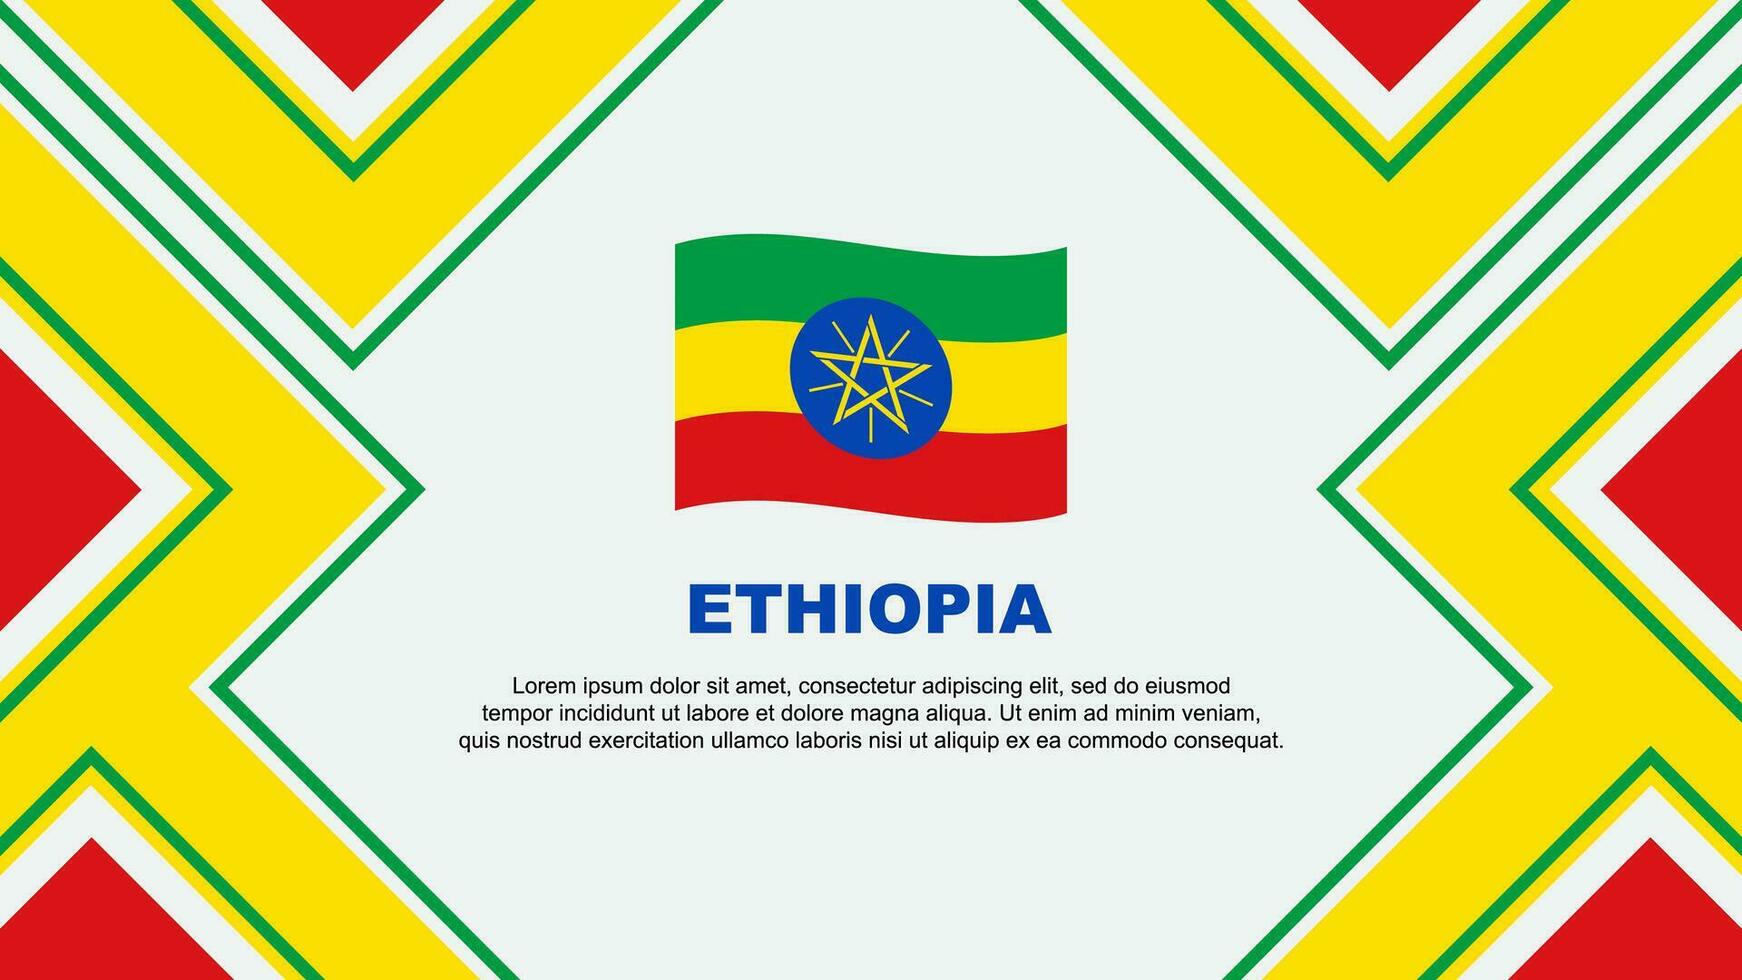 Ethiopia Flag Abstract Background Design Template. Ethiopia Independence Day Banner Wallpaper Vector Illustration. Ethiopia Vector